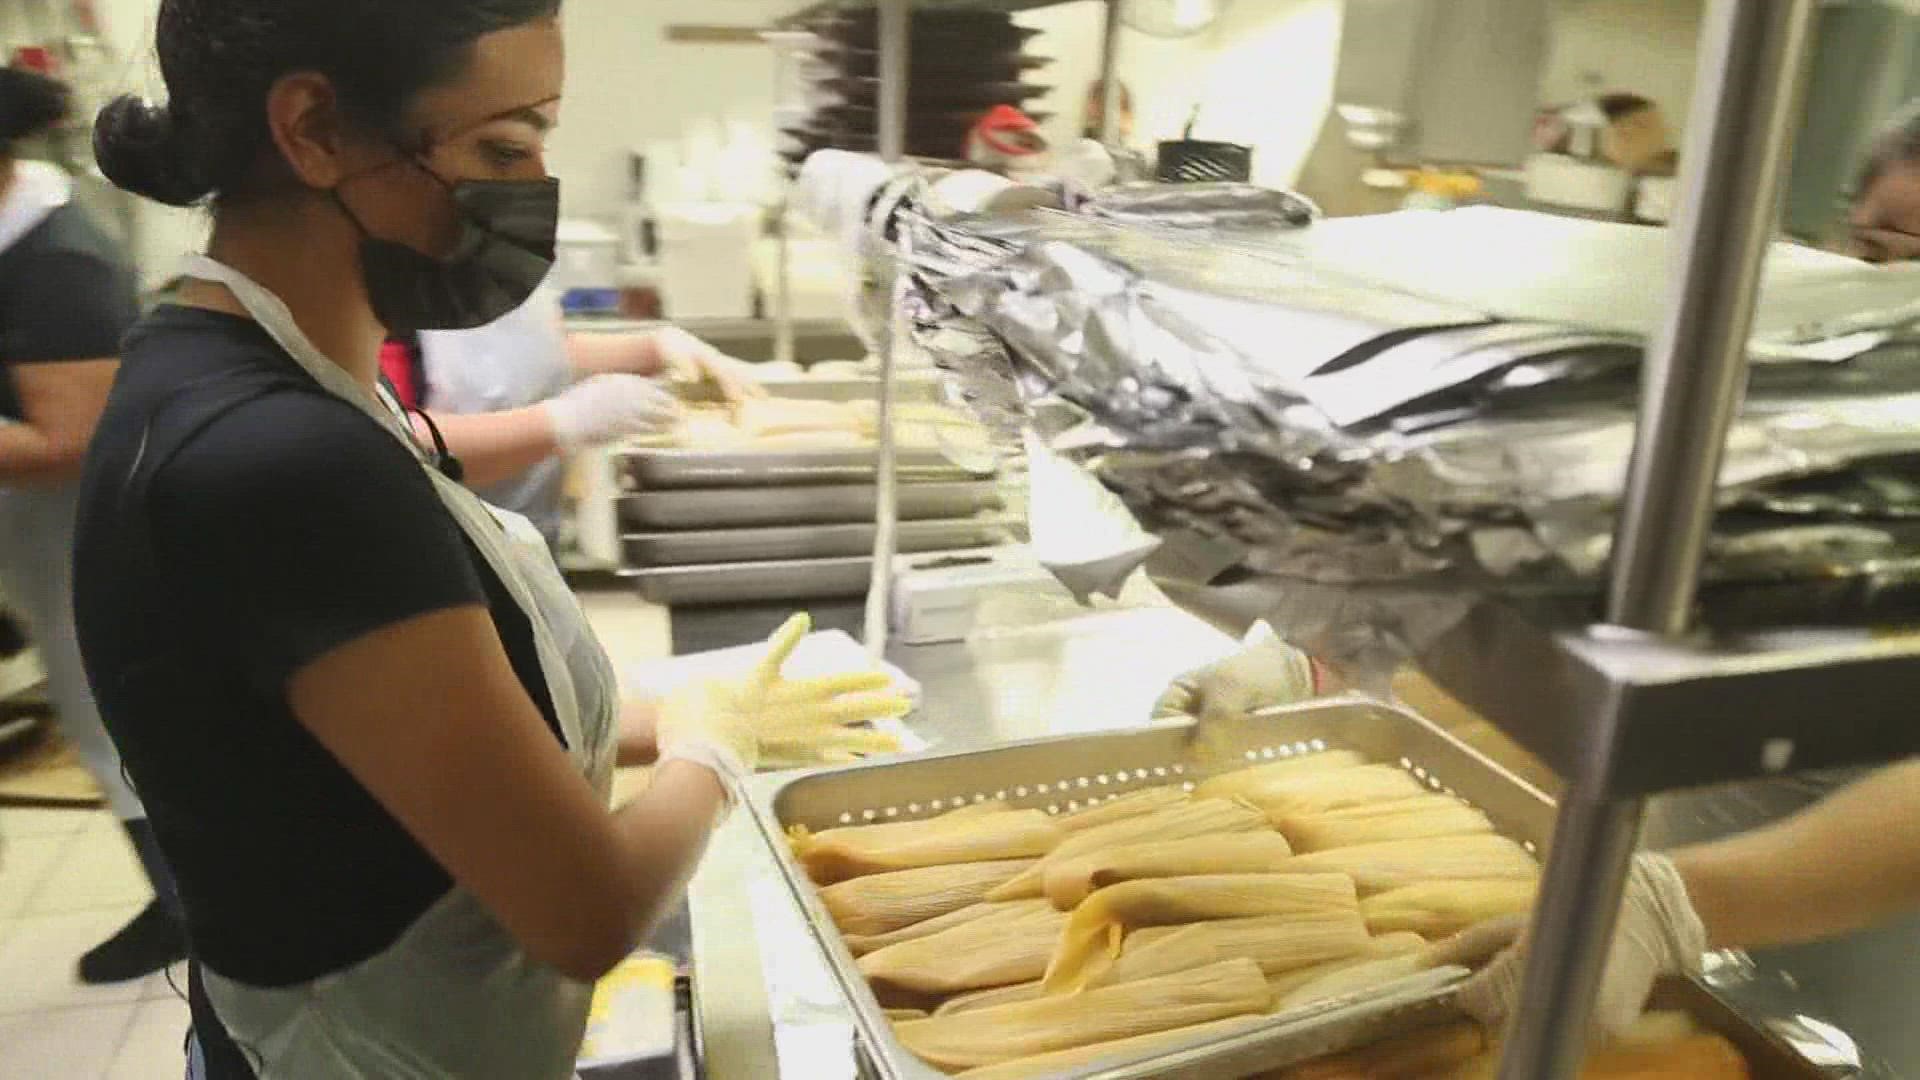 Tamaleria Nuevo Leon's owner said the cost of tamale ingredients rose this holiday season, but demand tripled from last year.